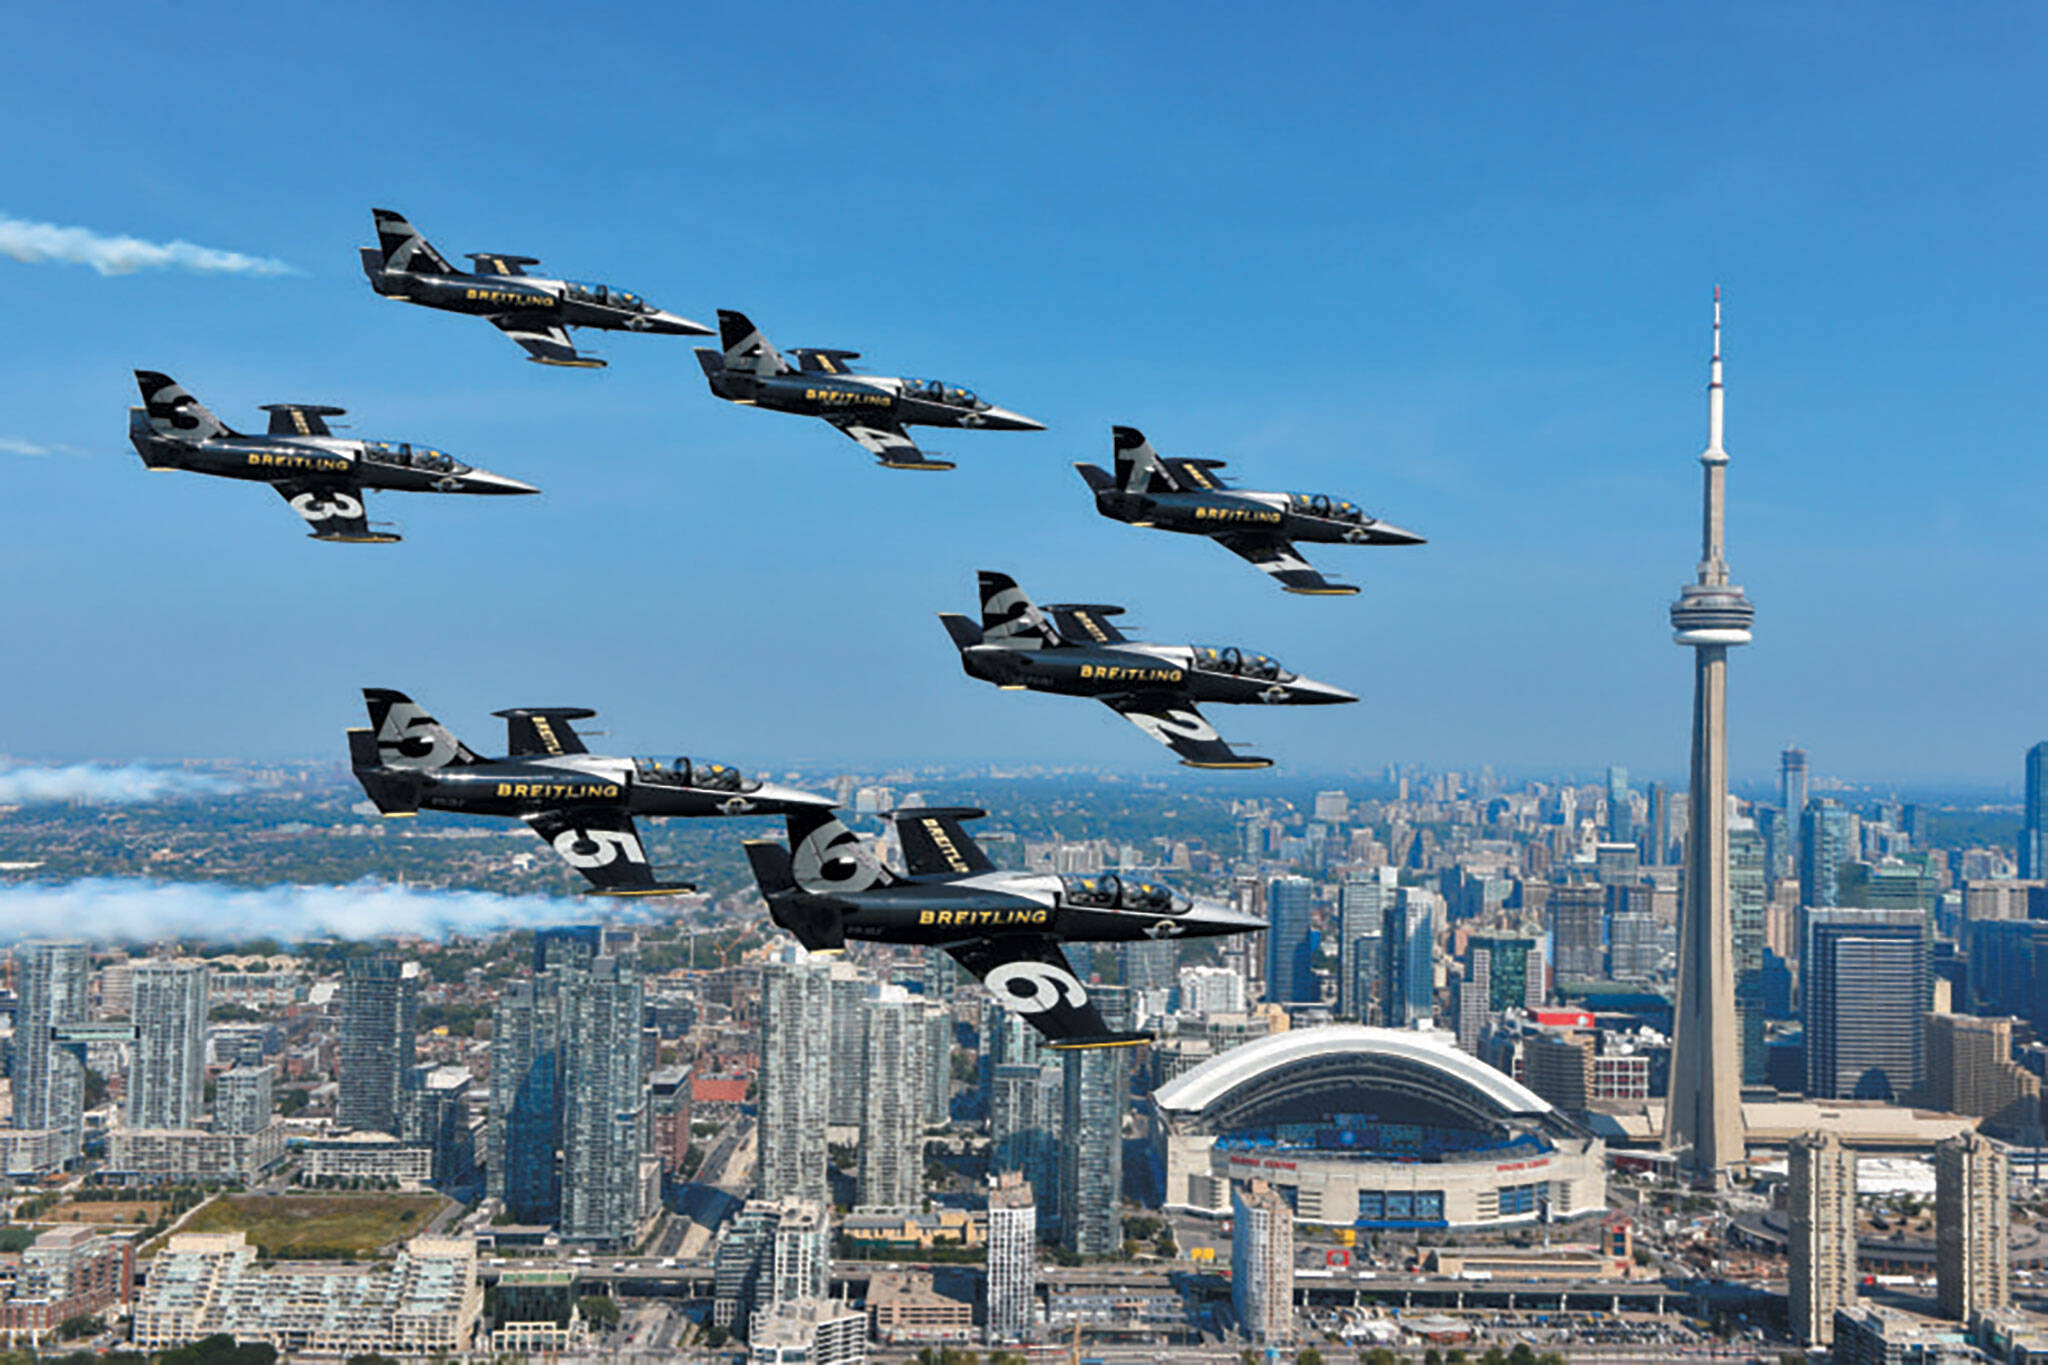 Toronto Air Show schedule and times for 2021